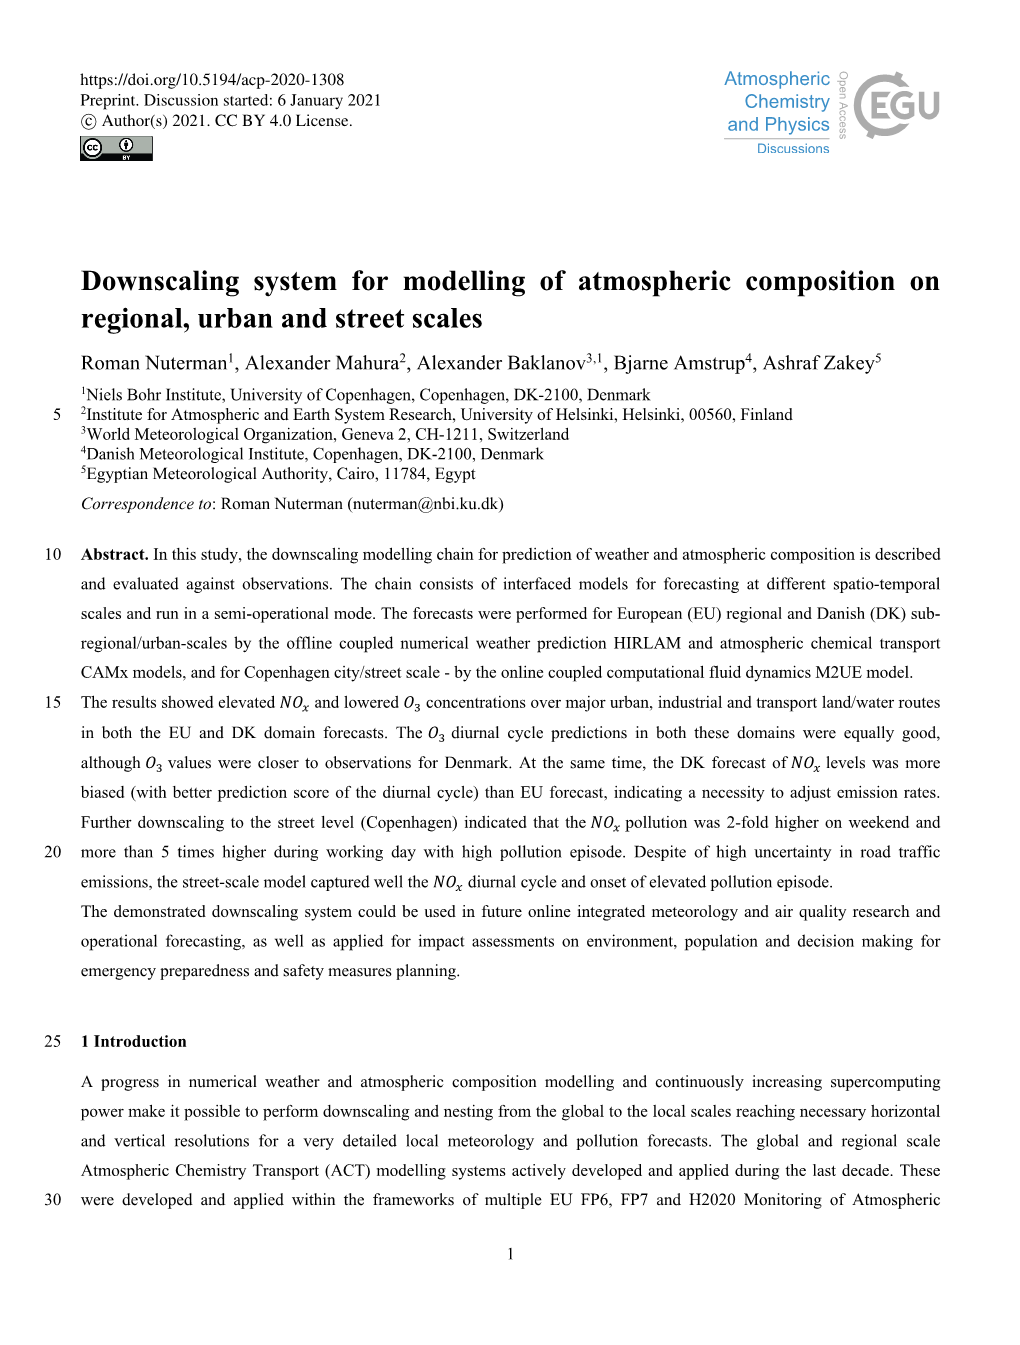 Downscaling System for Modelling of Atmospheric Composition On